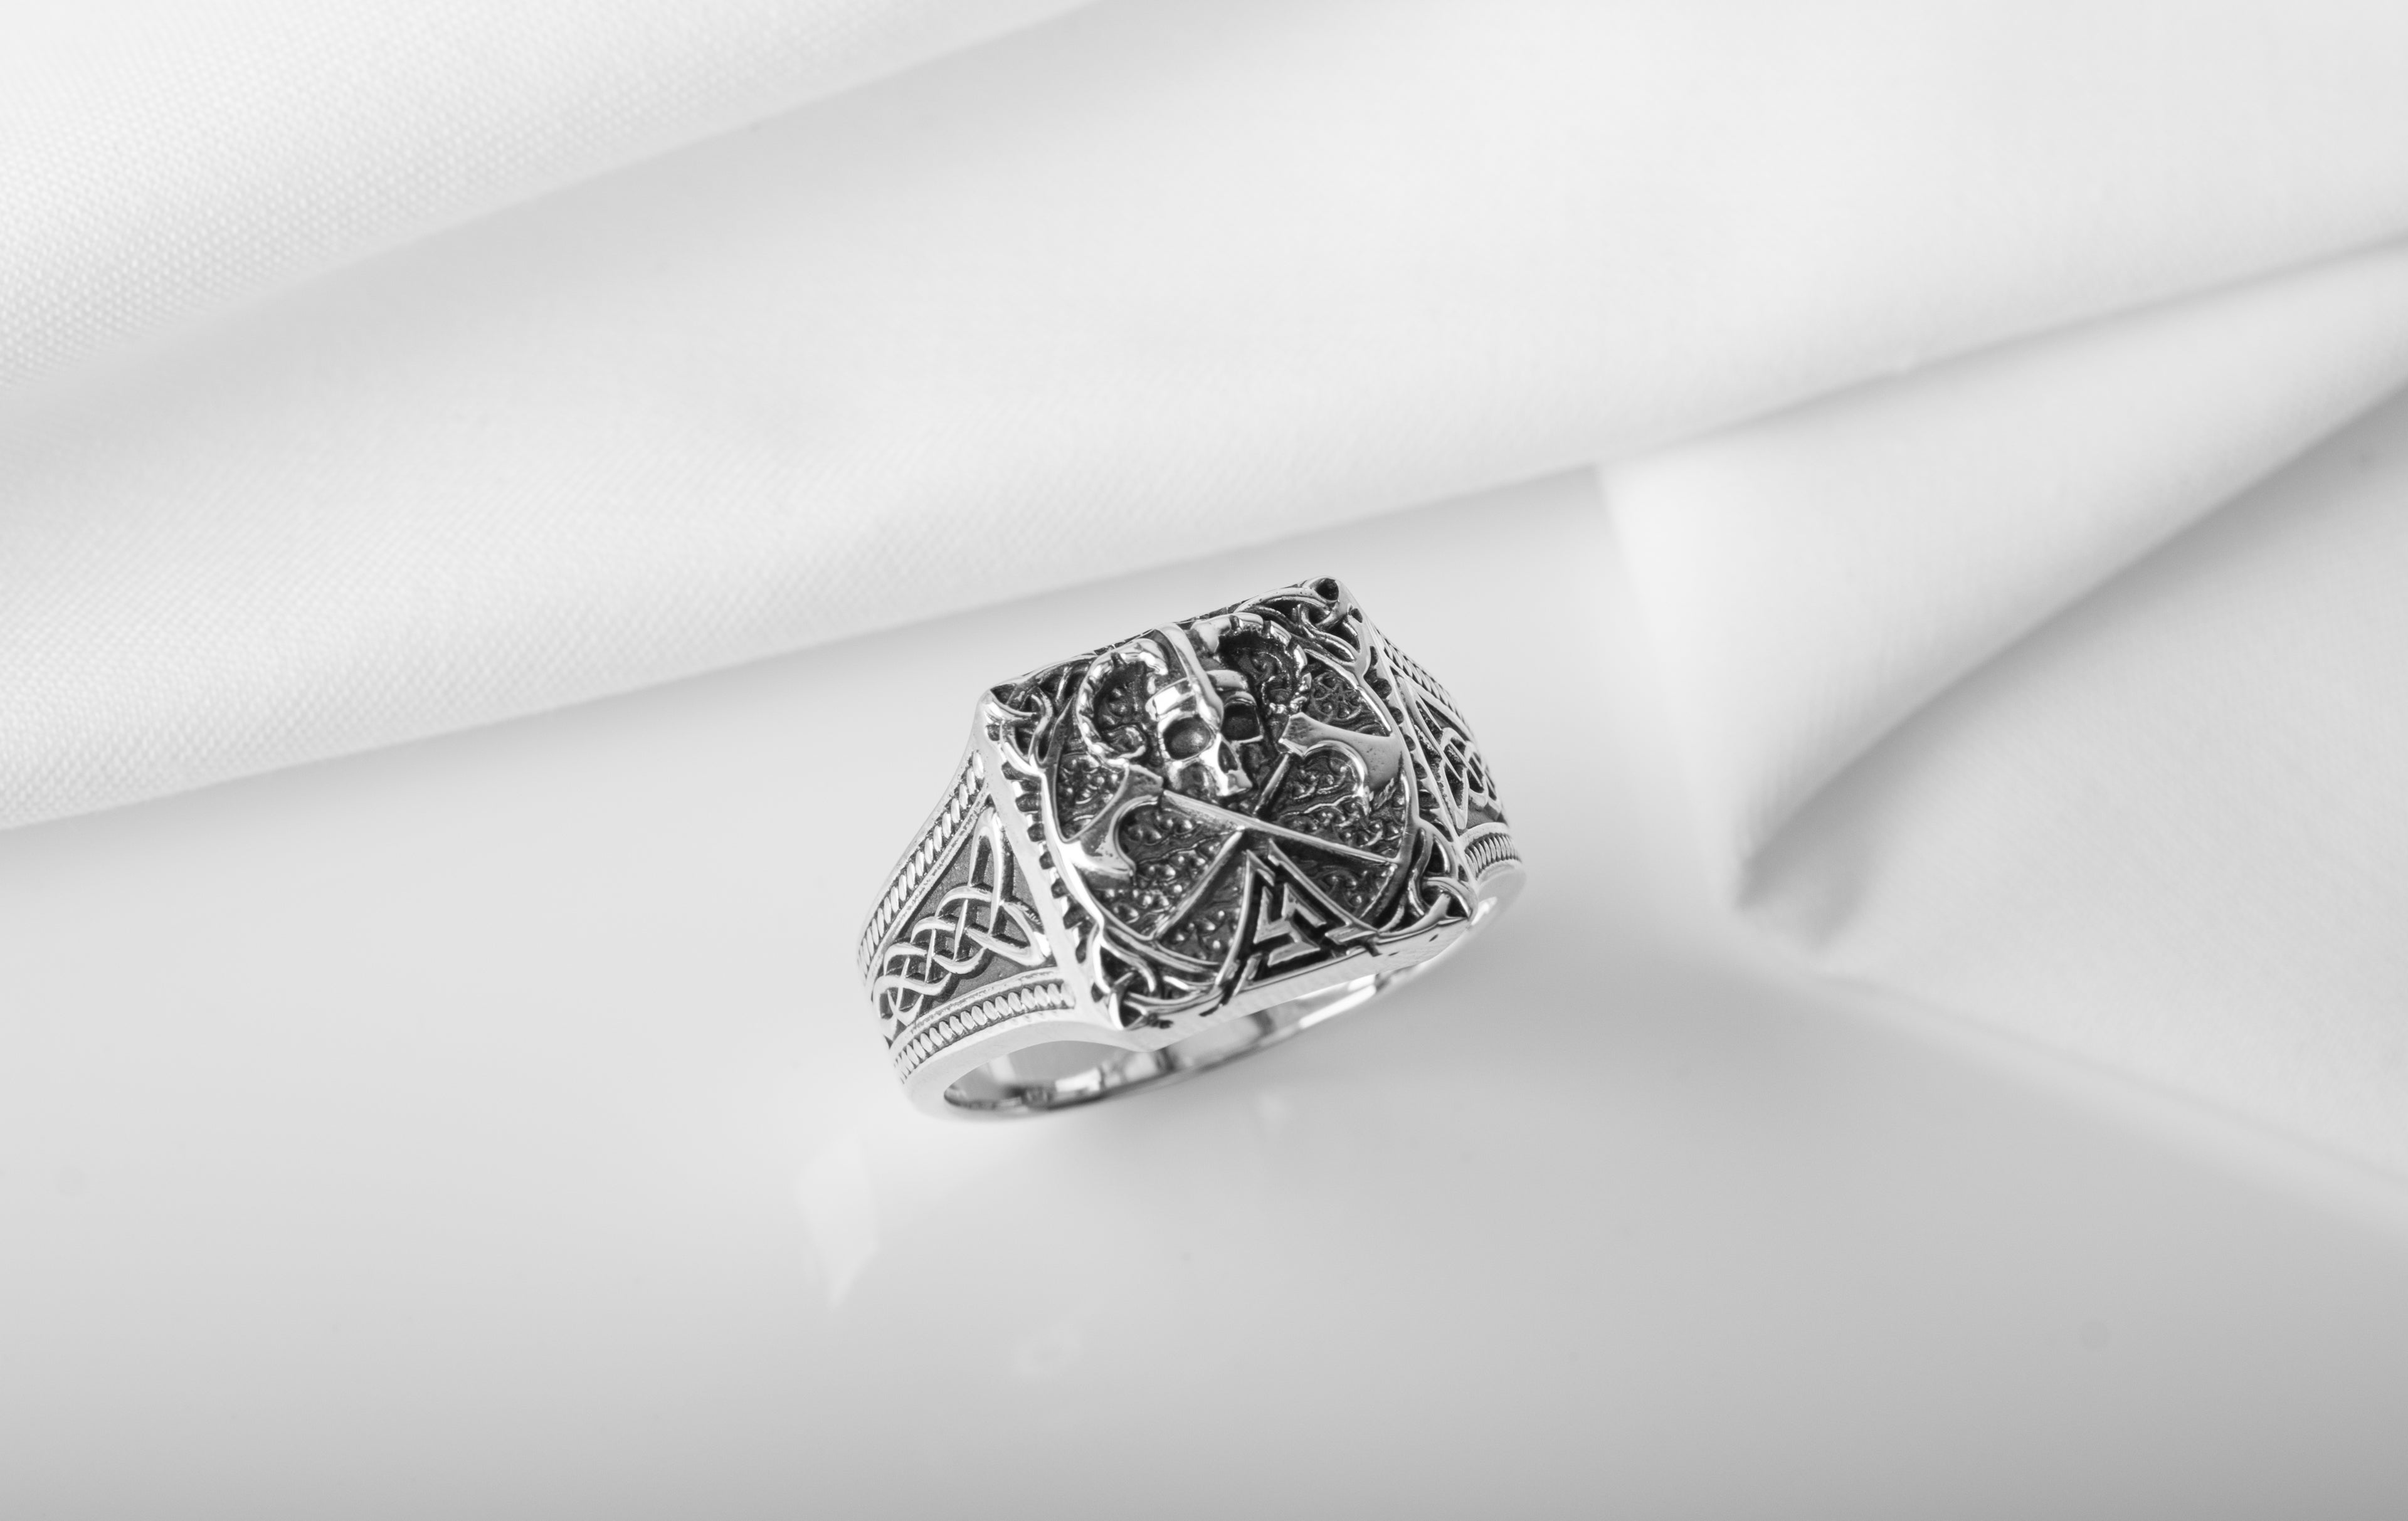 Unique Ring with Skull of Warrior, Axes, Valknut and celtic knots, 925 silver handmade Jewelry - vikingworkshop